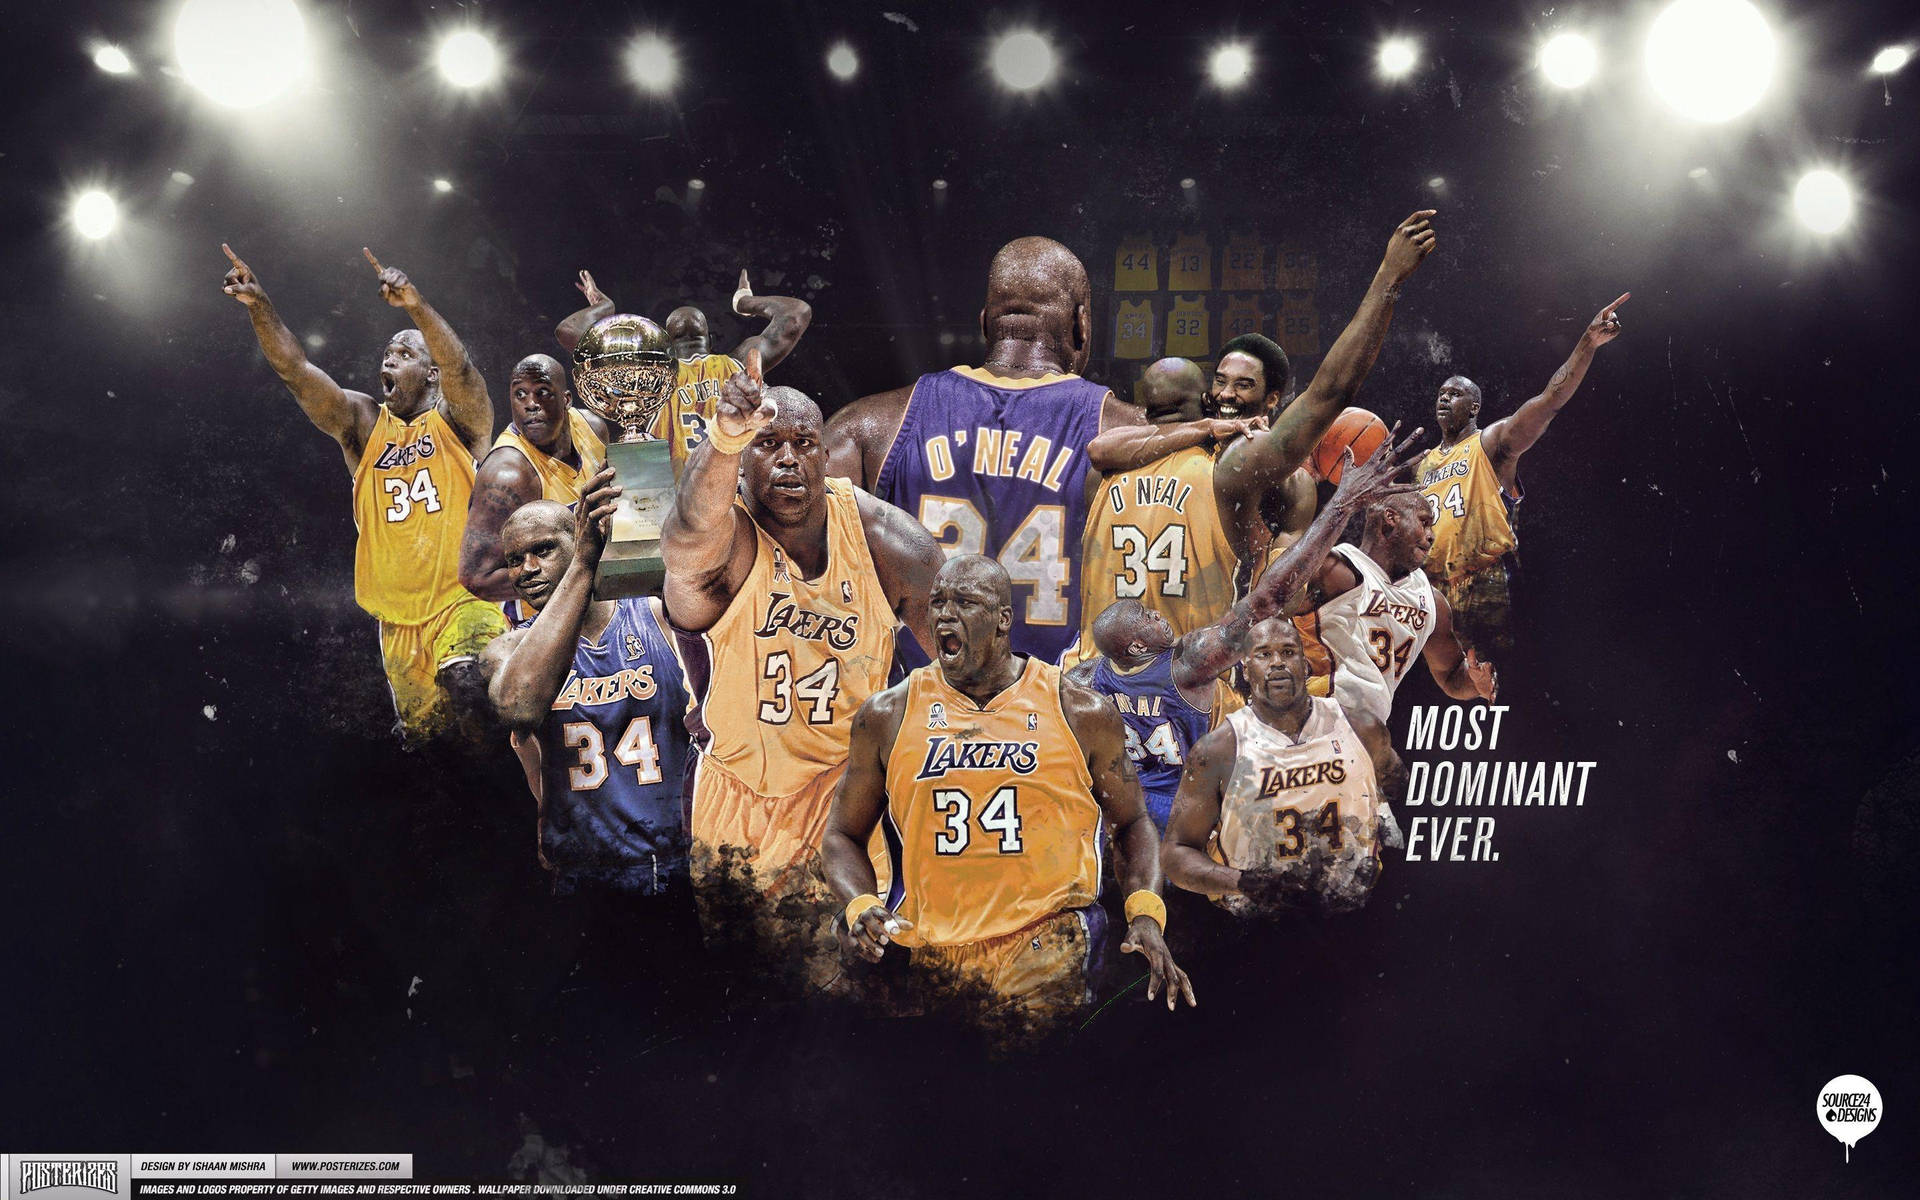 Shaquille O'neal Wallpaper